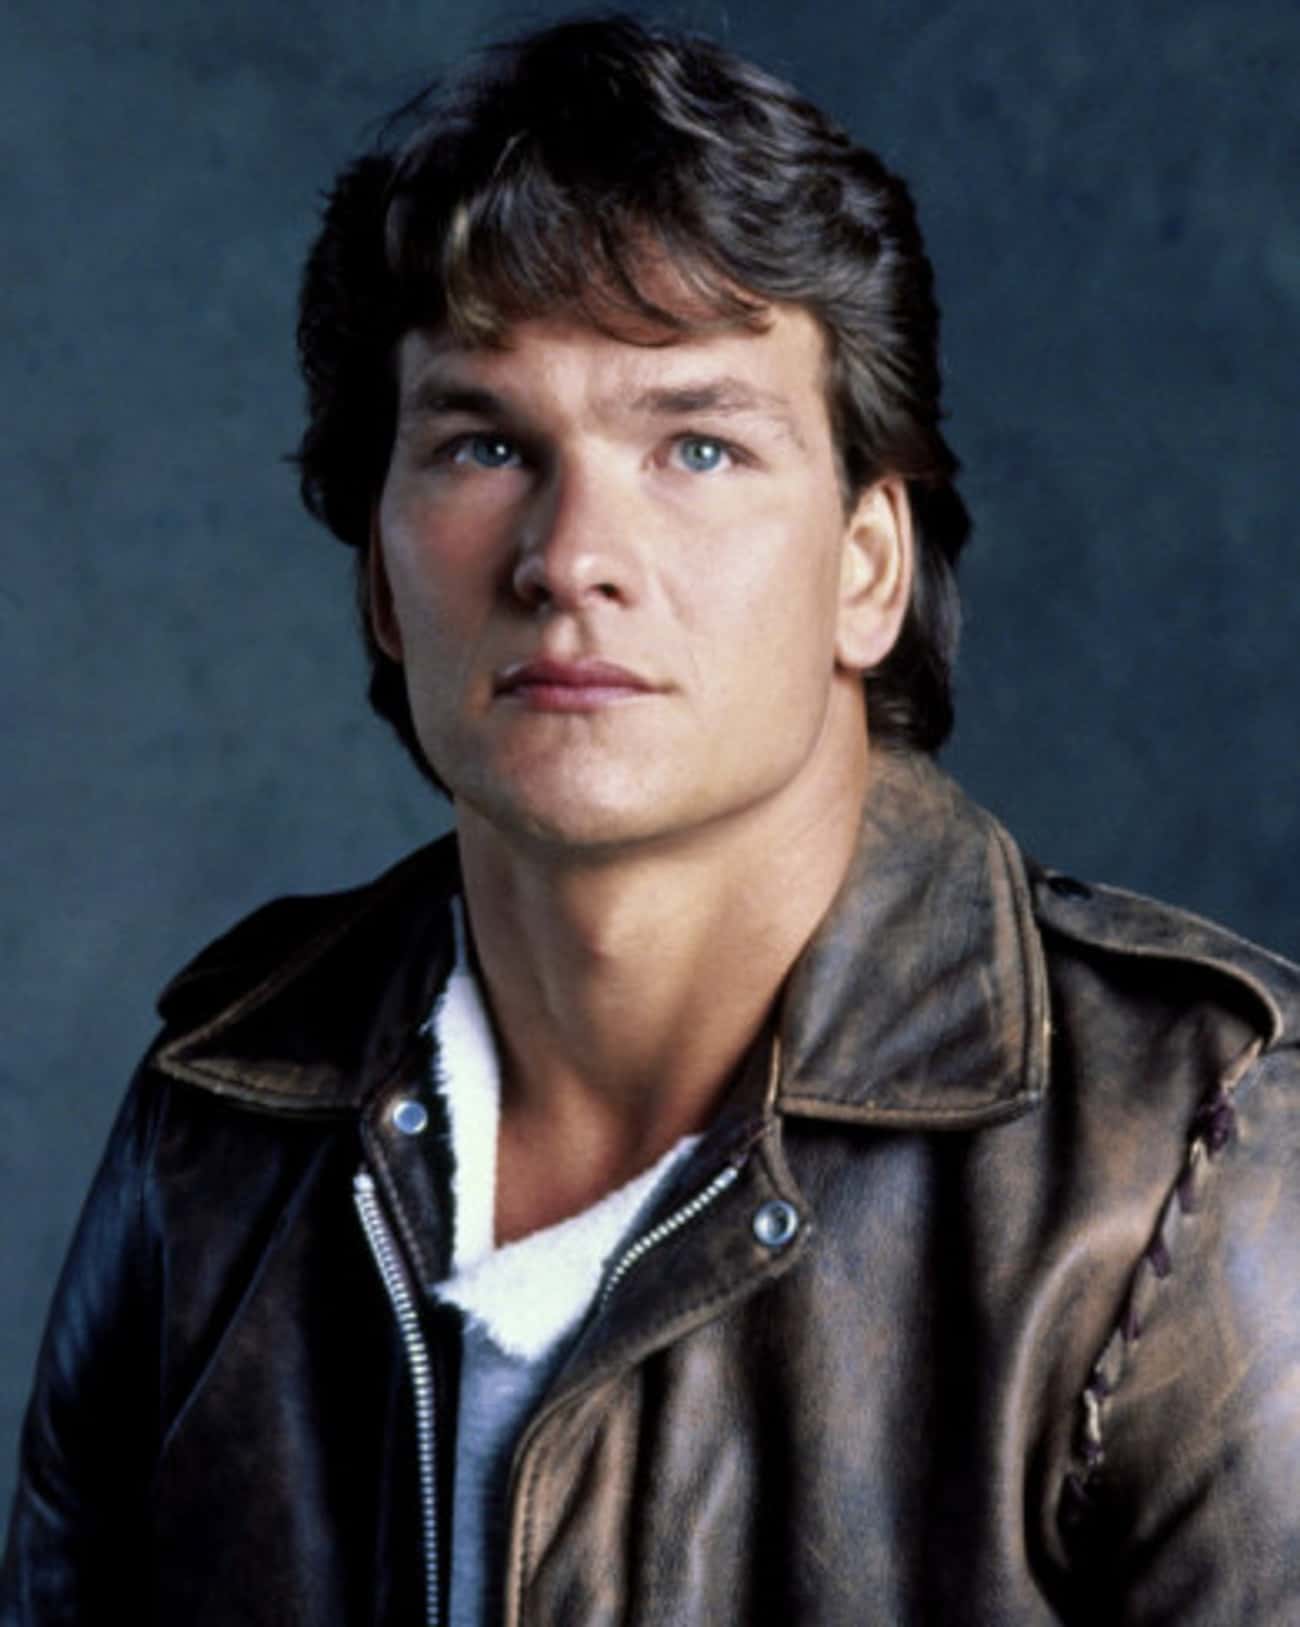 Young Patrick Swayze in Brown Leather Jacket